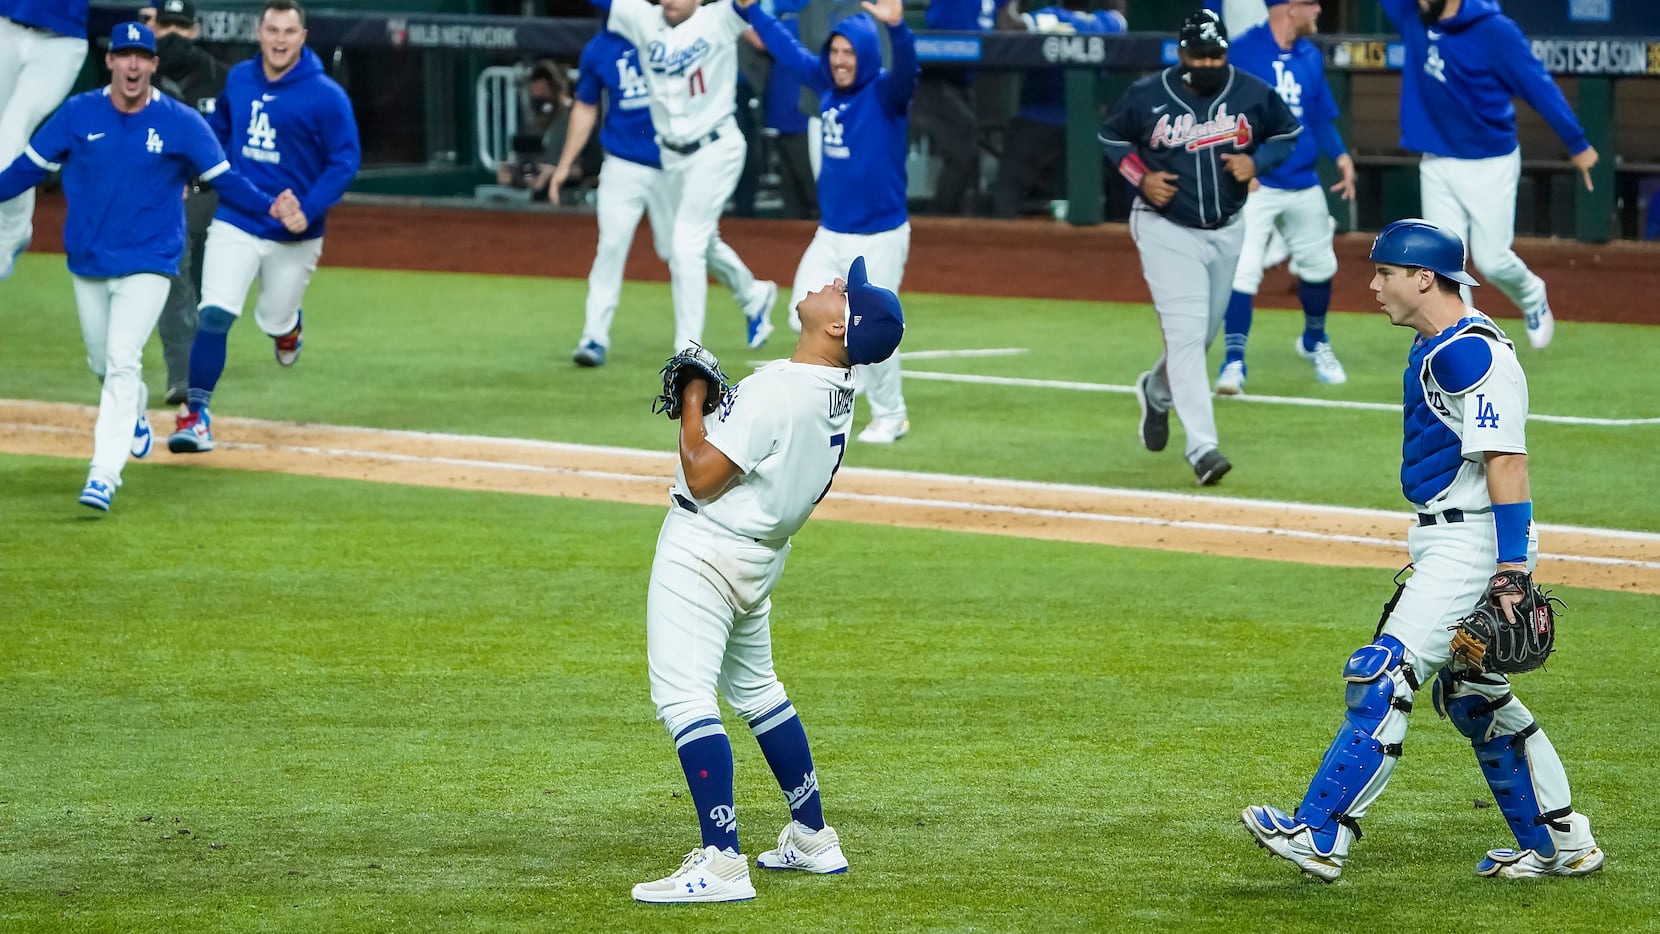 LA Dodgers eliminate Braves, setting up World Series duel with